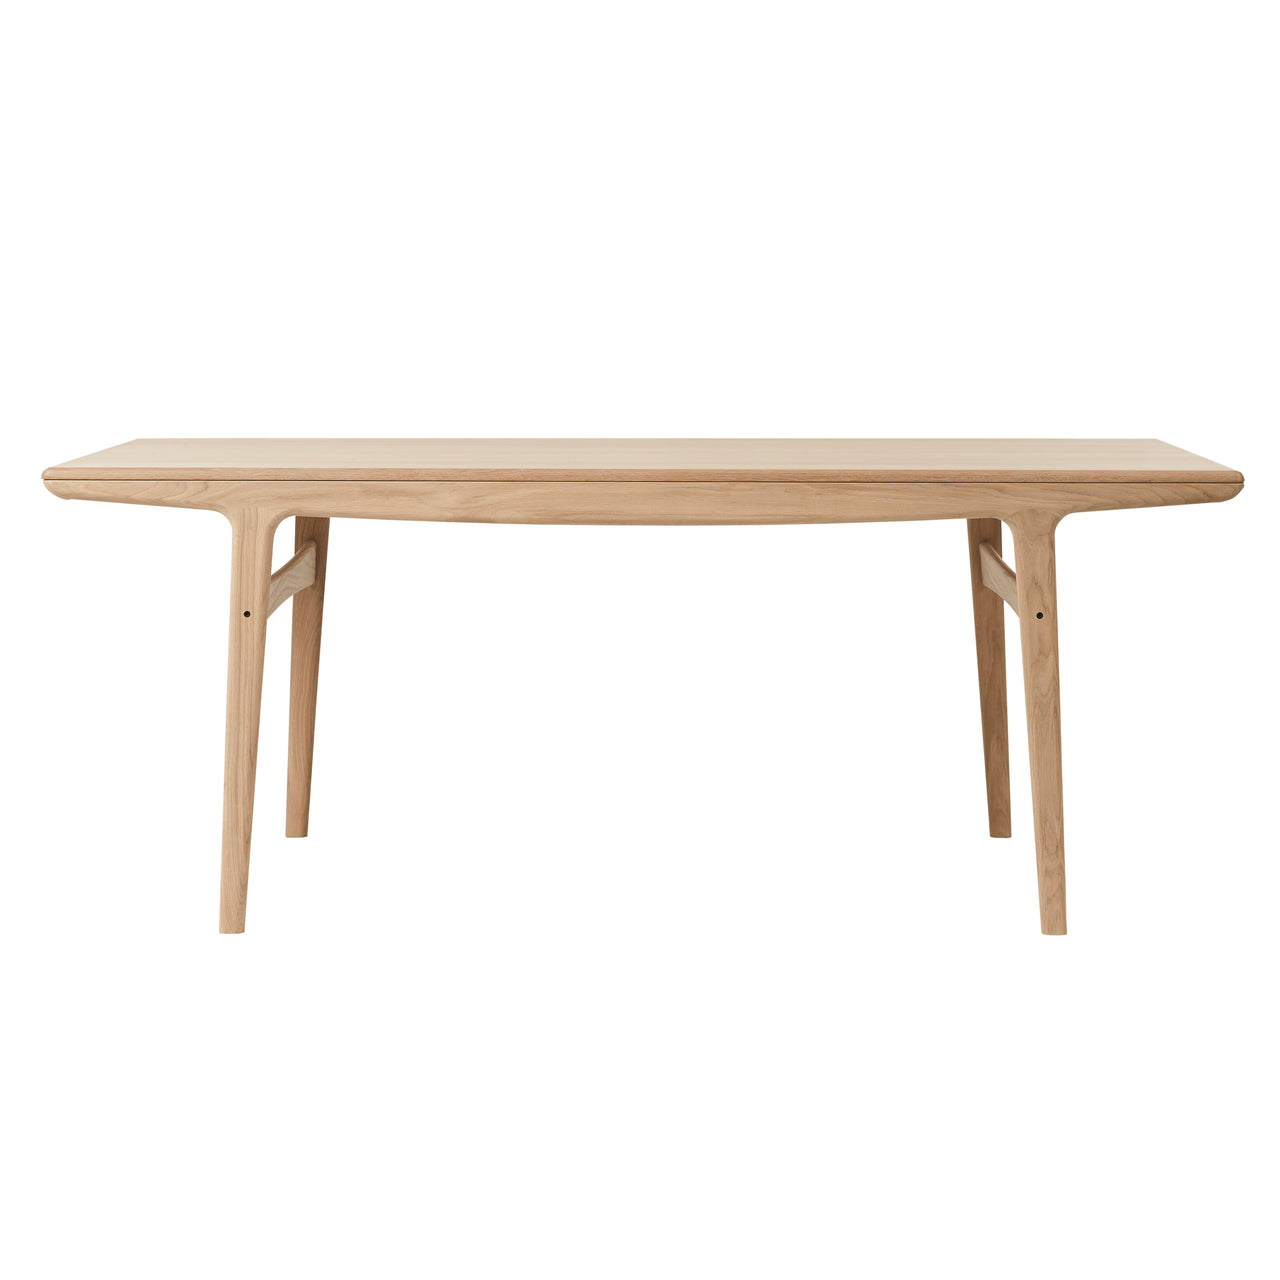 Evermore Dining Table: Without Extension + Large - 74.8